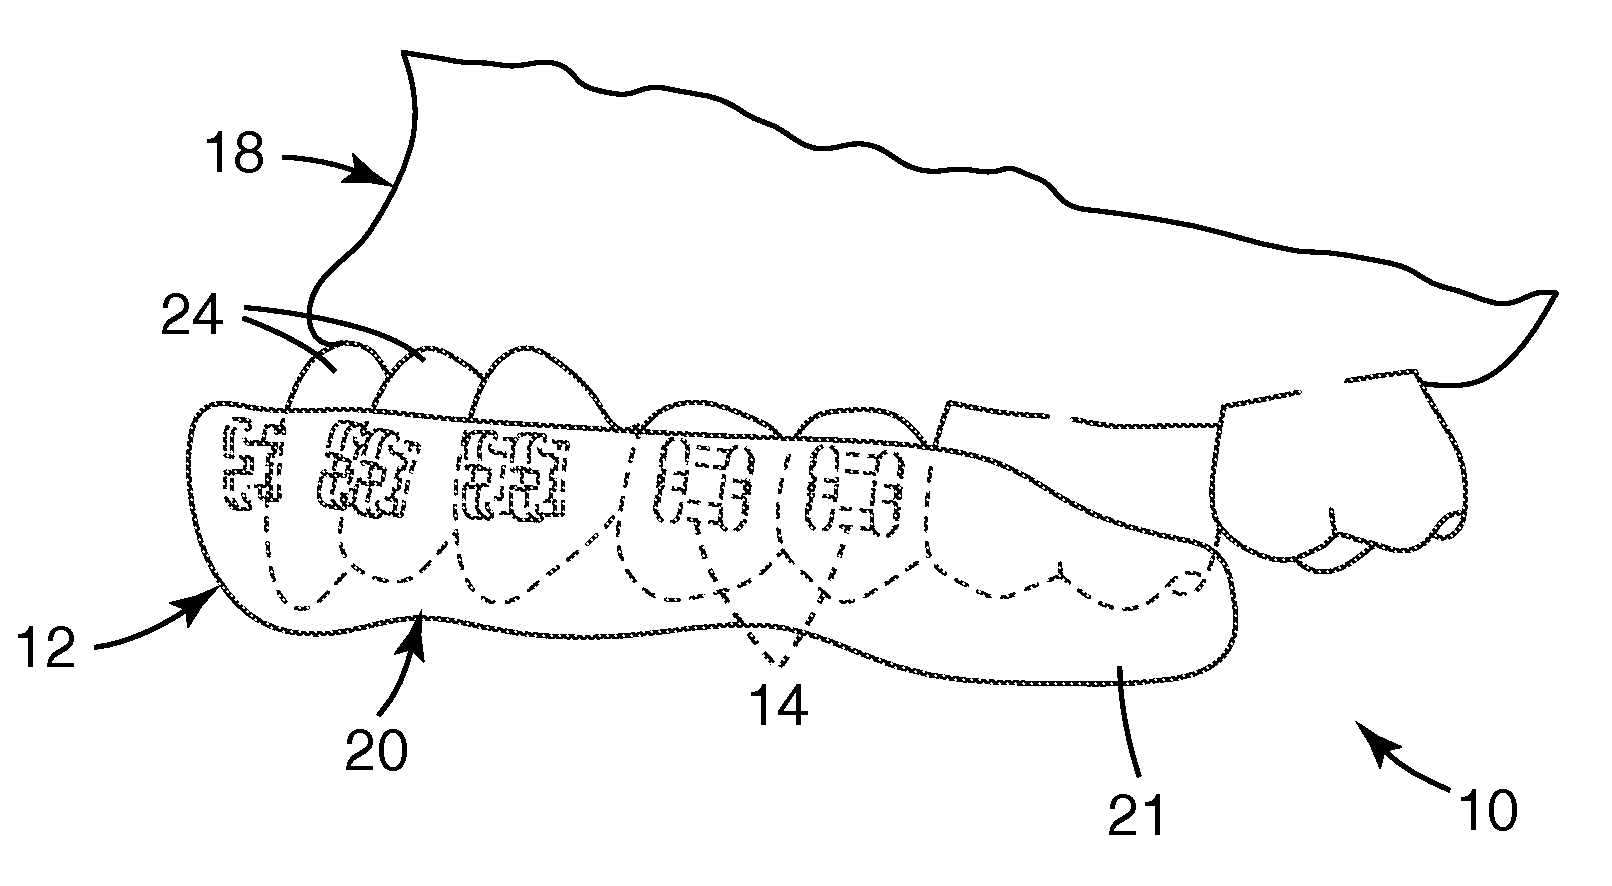 Methods and apparatus for applying dental sealant to an orthodontic patient's teeth